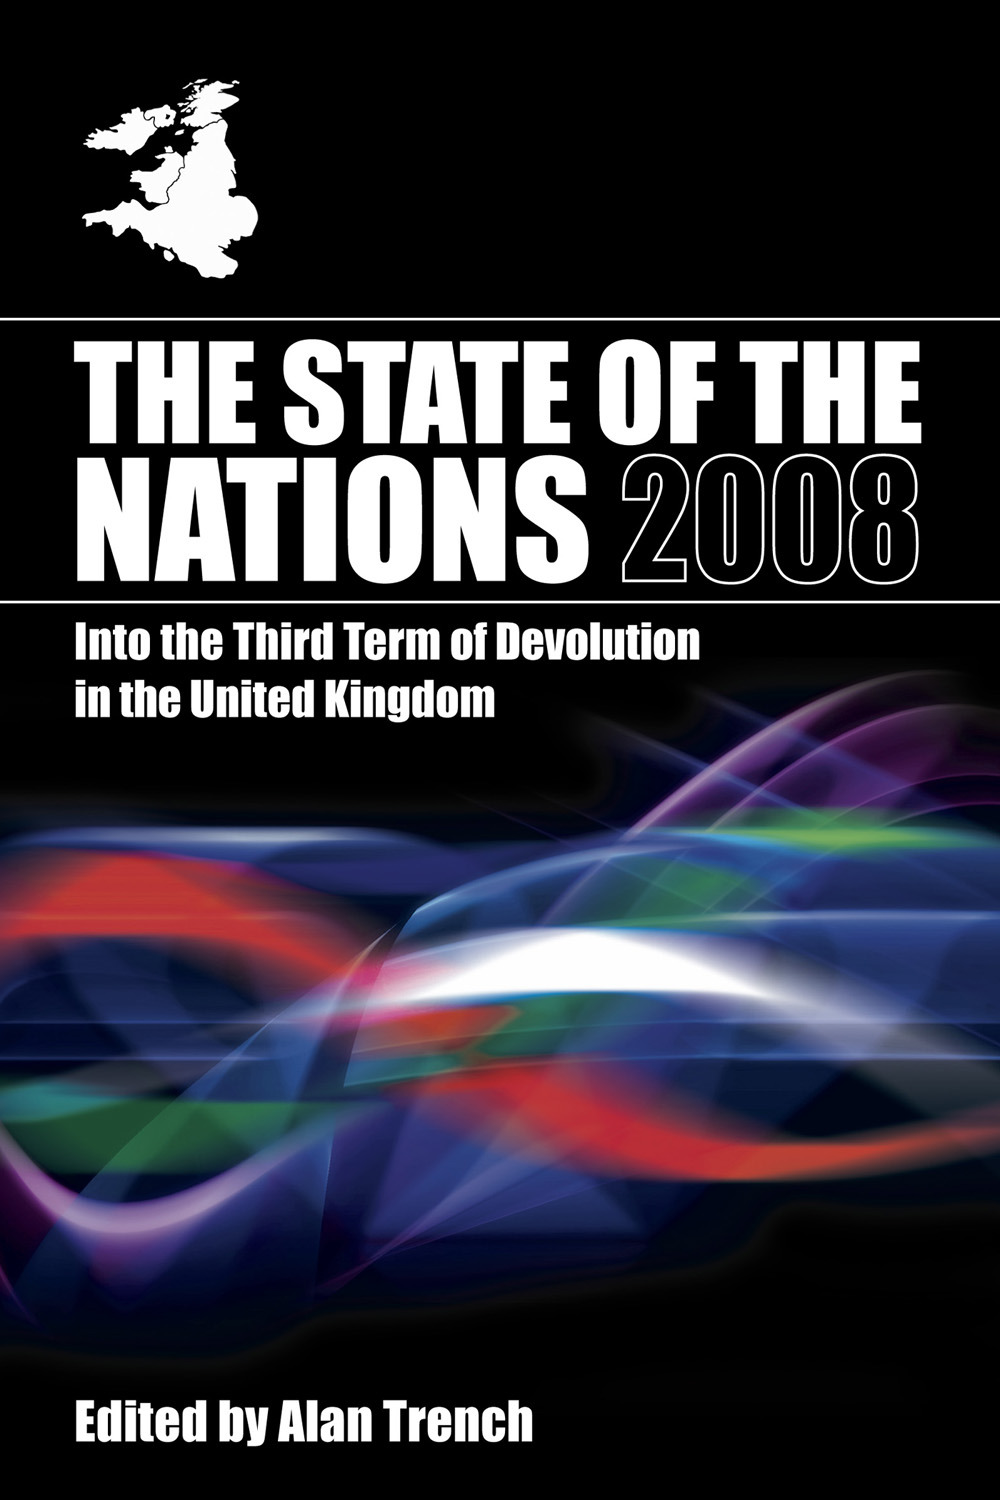 Trench, Alan - The State of the Nations 2008, ebook